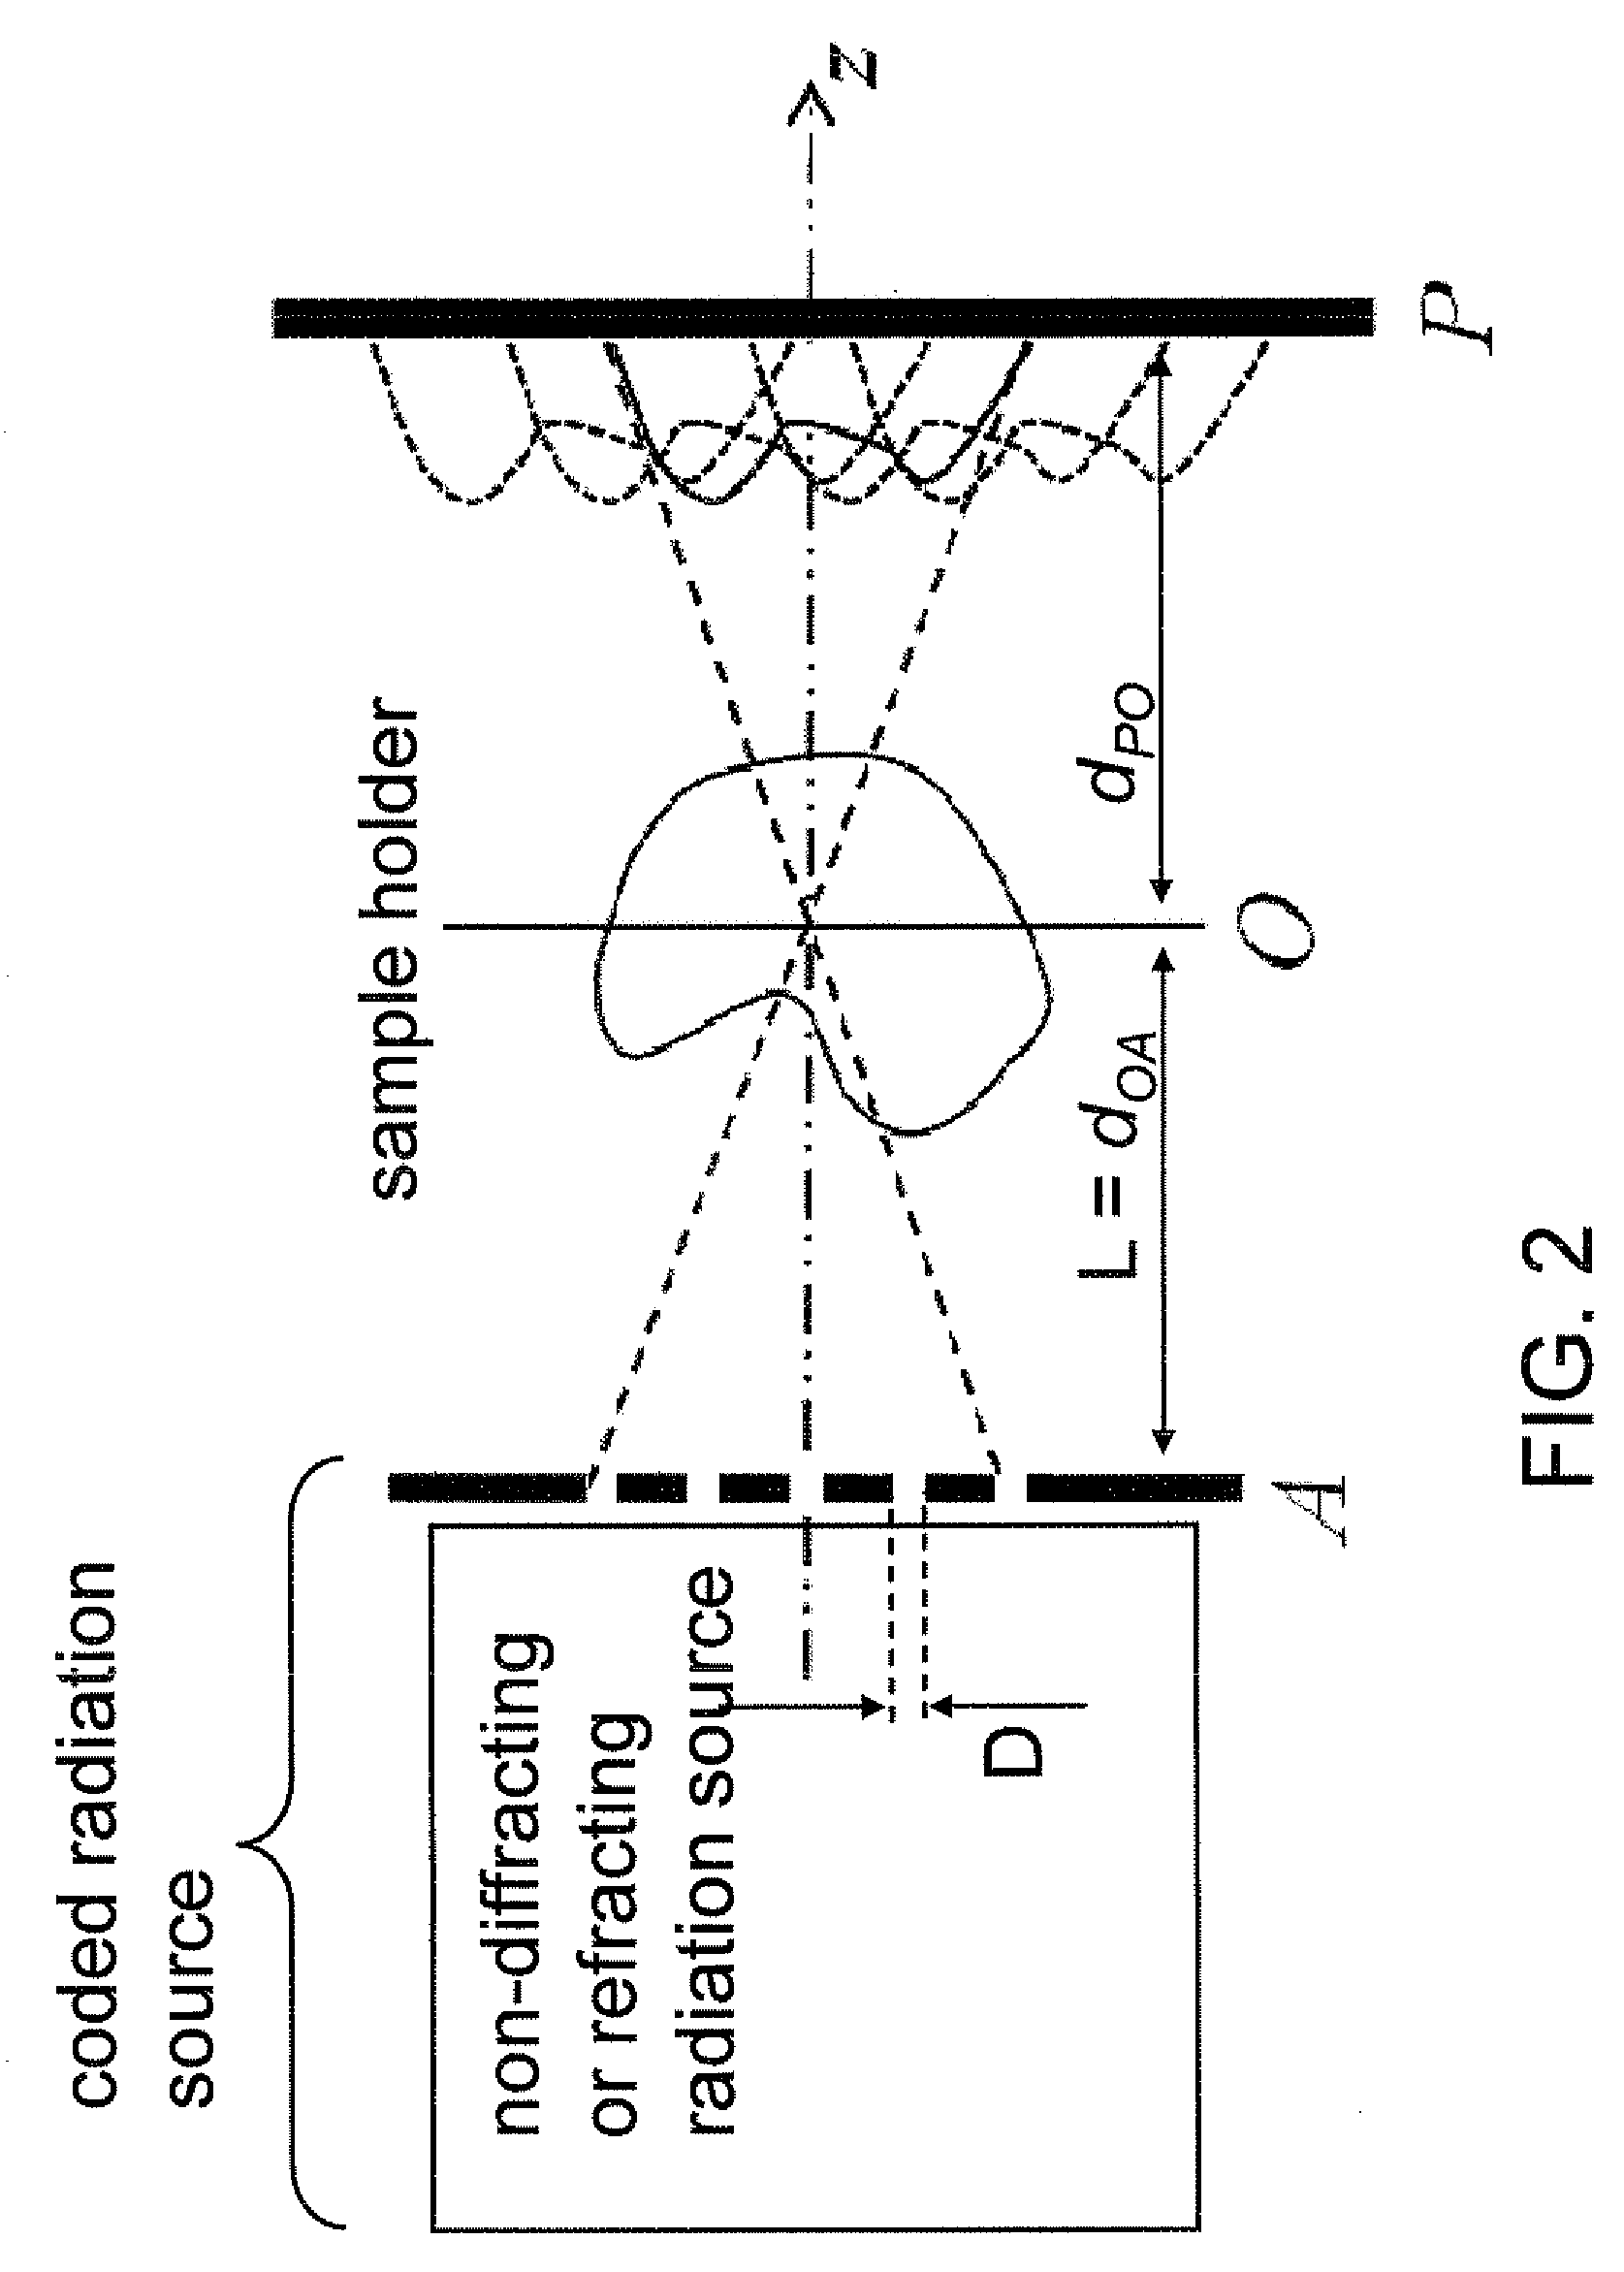 Apparatus and method to achieve high-resolution microscopy with non-diffracting or refracting radiation